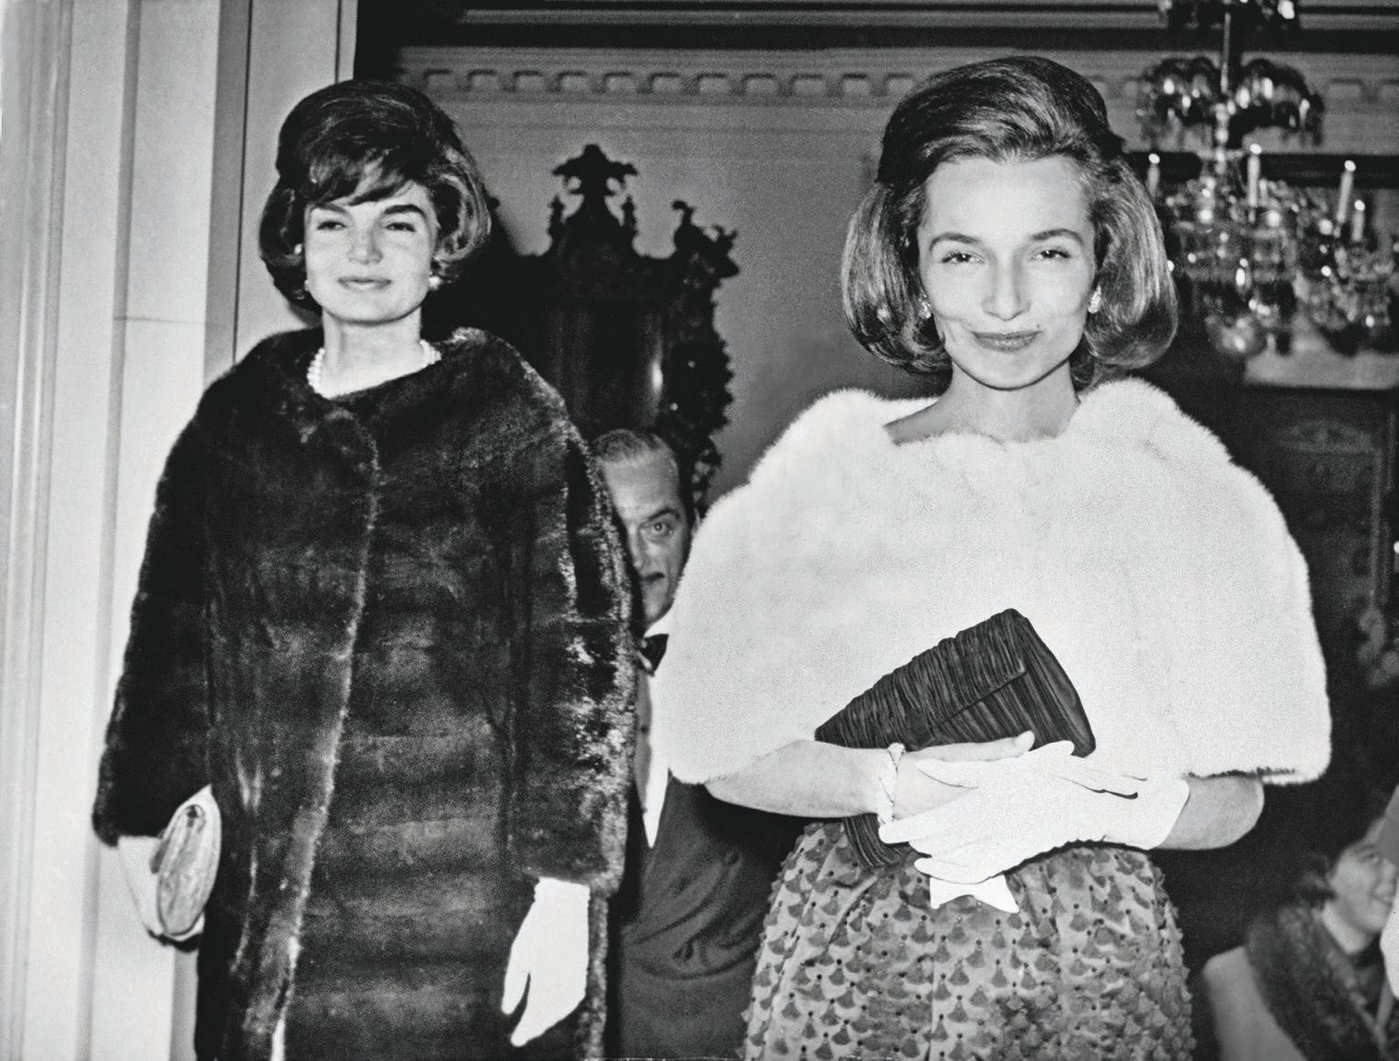 Jacqueline Kennedy and her sister, Princess Lee Radziwill, leaving The Carlyle, 1961. PHOTO © BETTMANN/GETTY IMAGES/COURTESY OF ASSOULINE